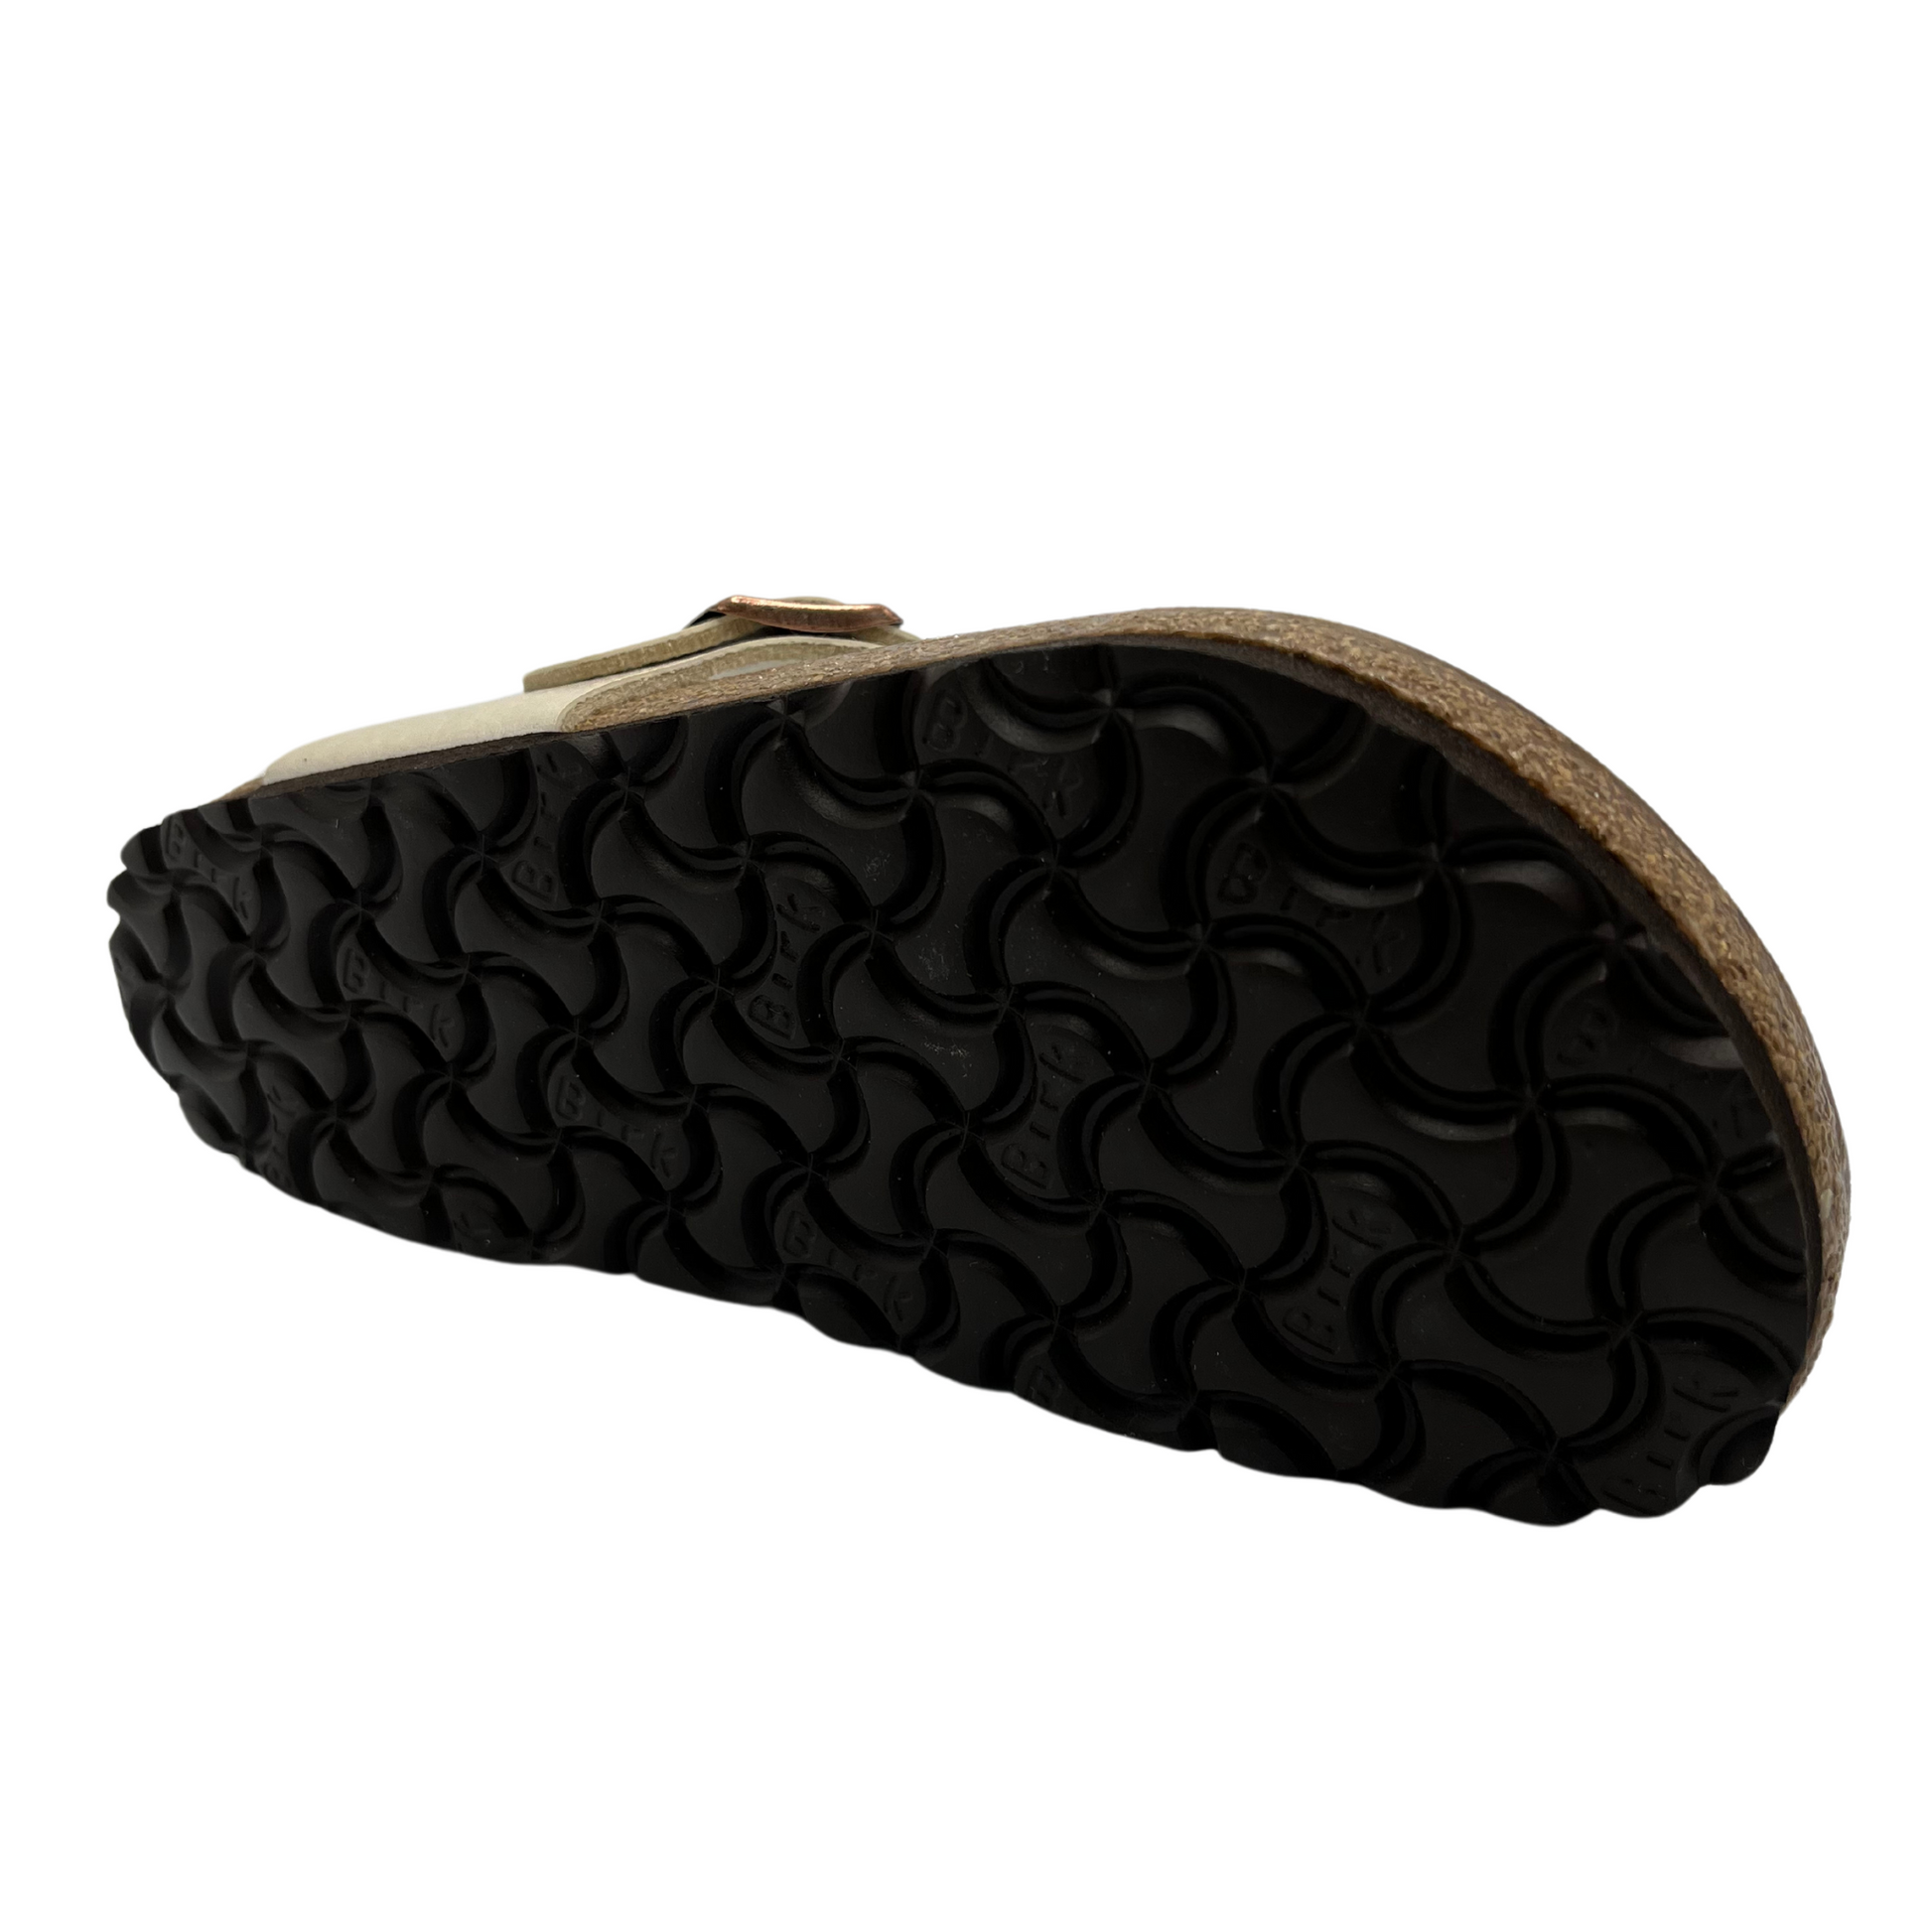 Bottom view of synthetic leather thong sandal with bronze buckle strap and suede lined contoured footbed.